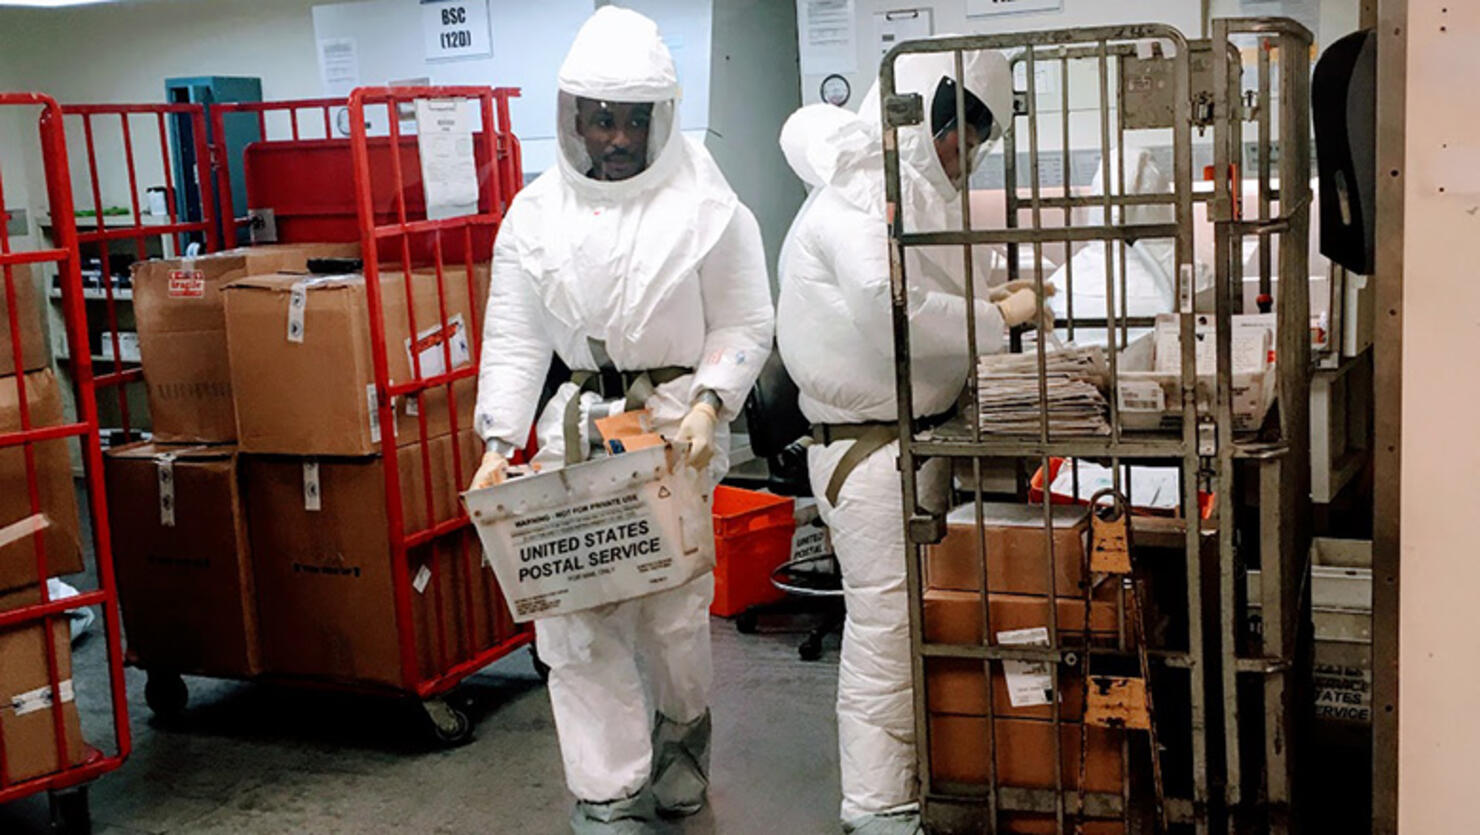 US Defense Department personnel, wearing protective suits, screen mail as it arrives at a US government facility near the Pentagon in Washington, DC on October 2, 2018. - Two or more packages delivered to the Pentagon this week were suspected to contain the deadly poison ricin